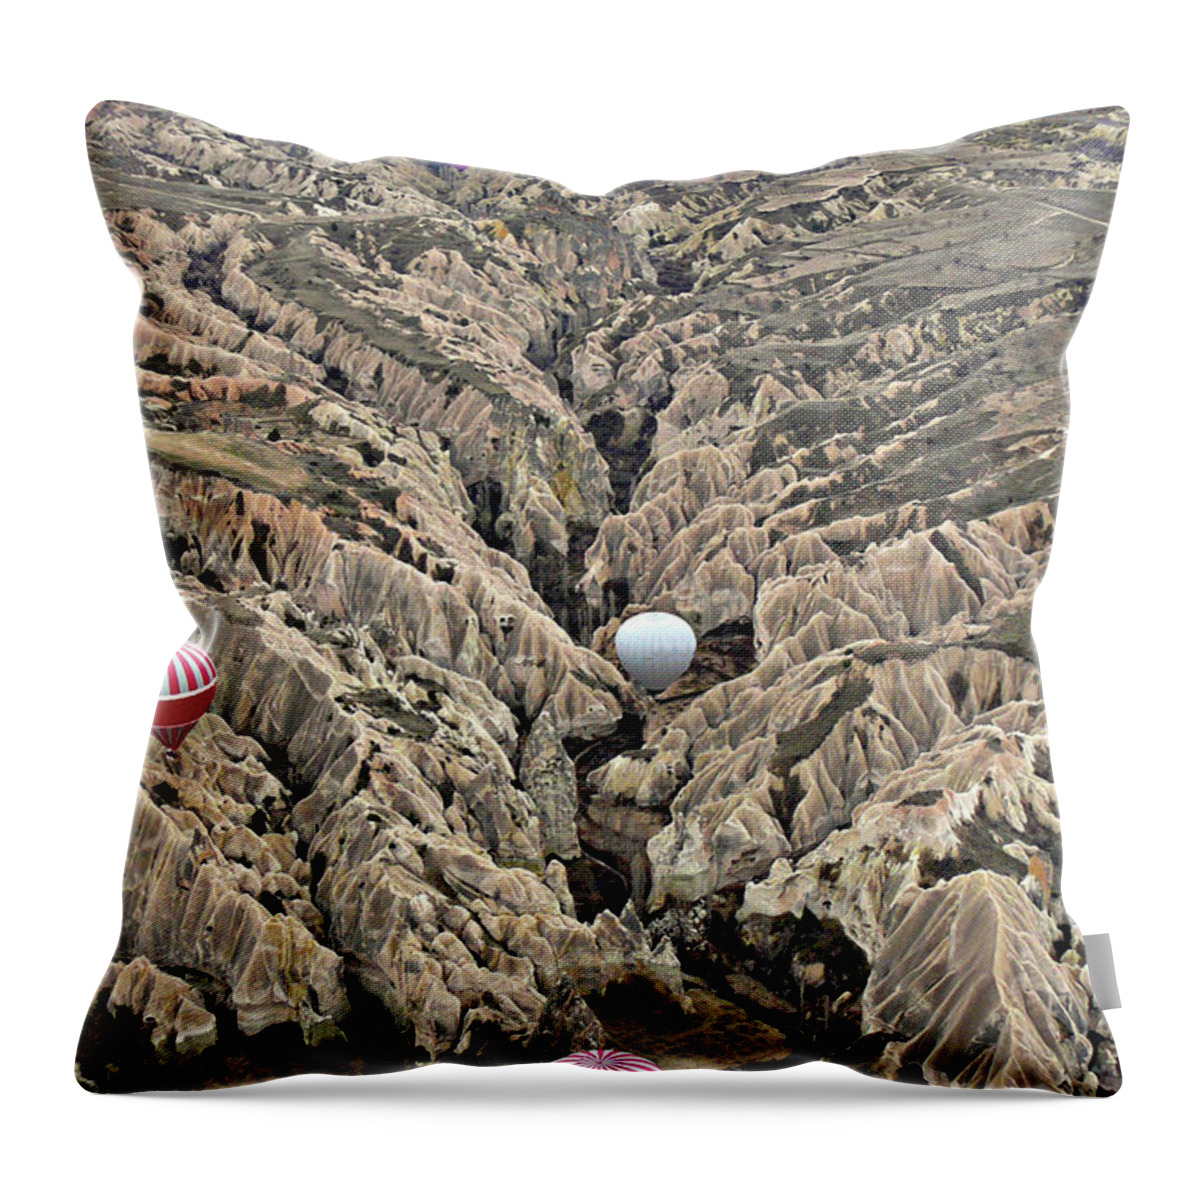 Dawn Throw Pillow featuring the photograph Hot Air Balloons Over Fairy Chimneys In by Gregory T. Smith